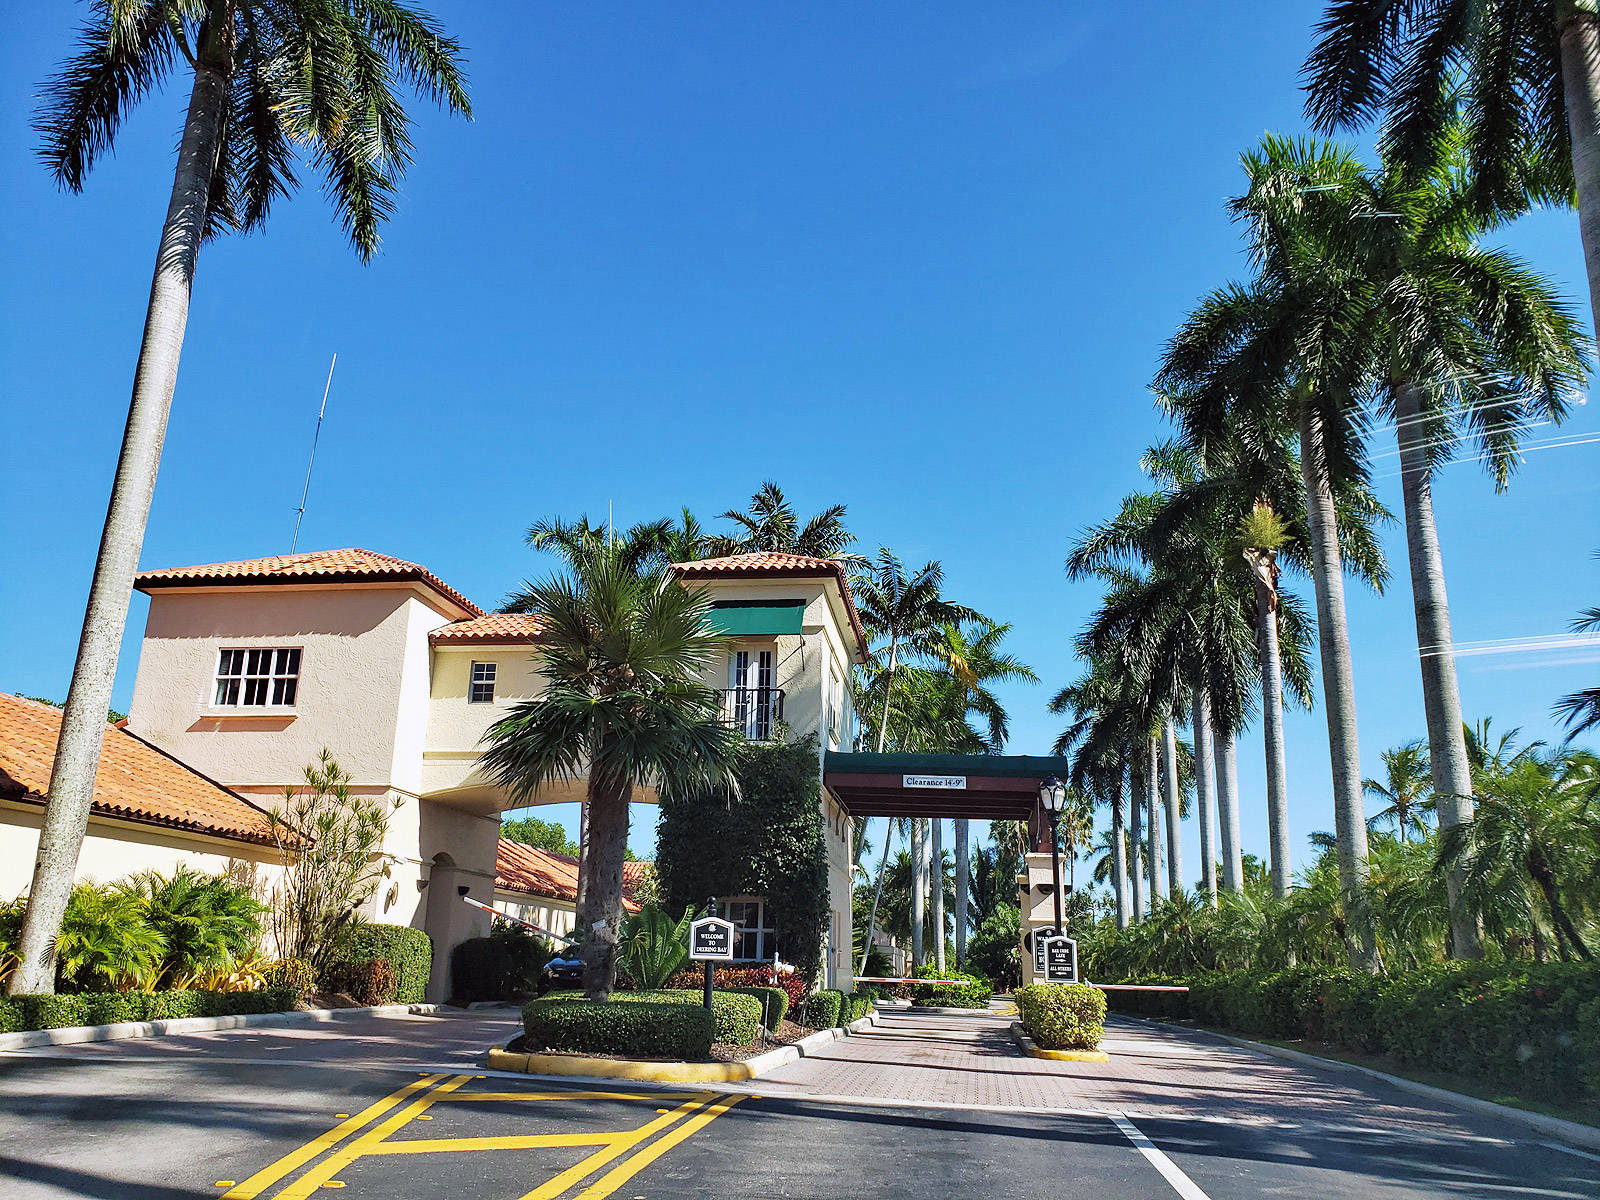 Deering Bay Coral Gables - Guardhouse